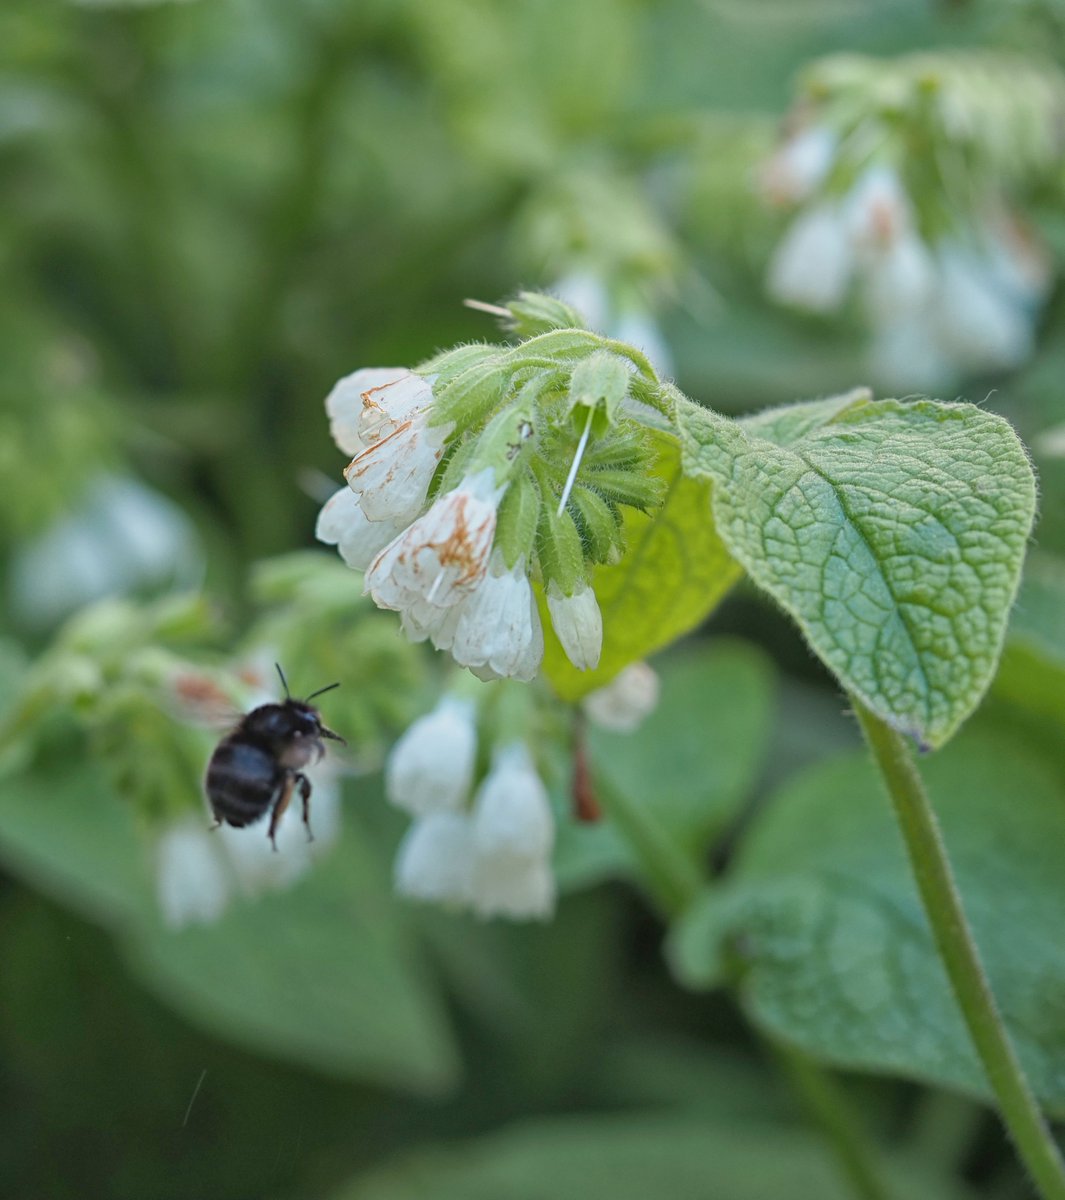 Female Hairy-footed flower bee enjoying the Comfrey in the North Courtyard at @theUL. #WildWebsWednesday